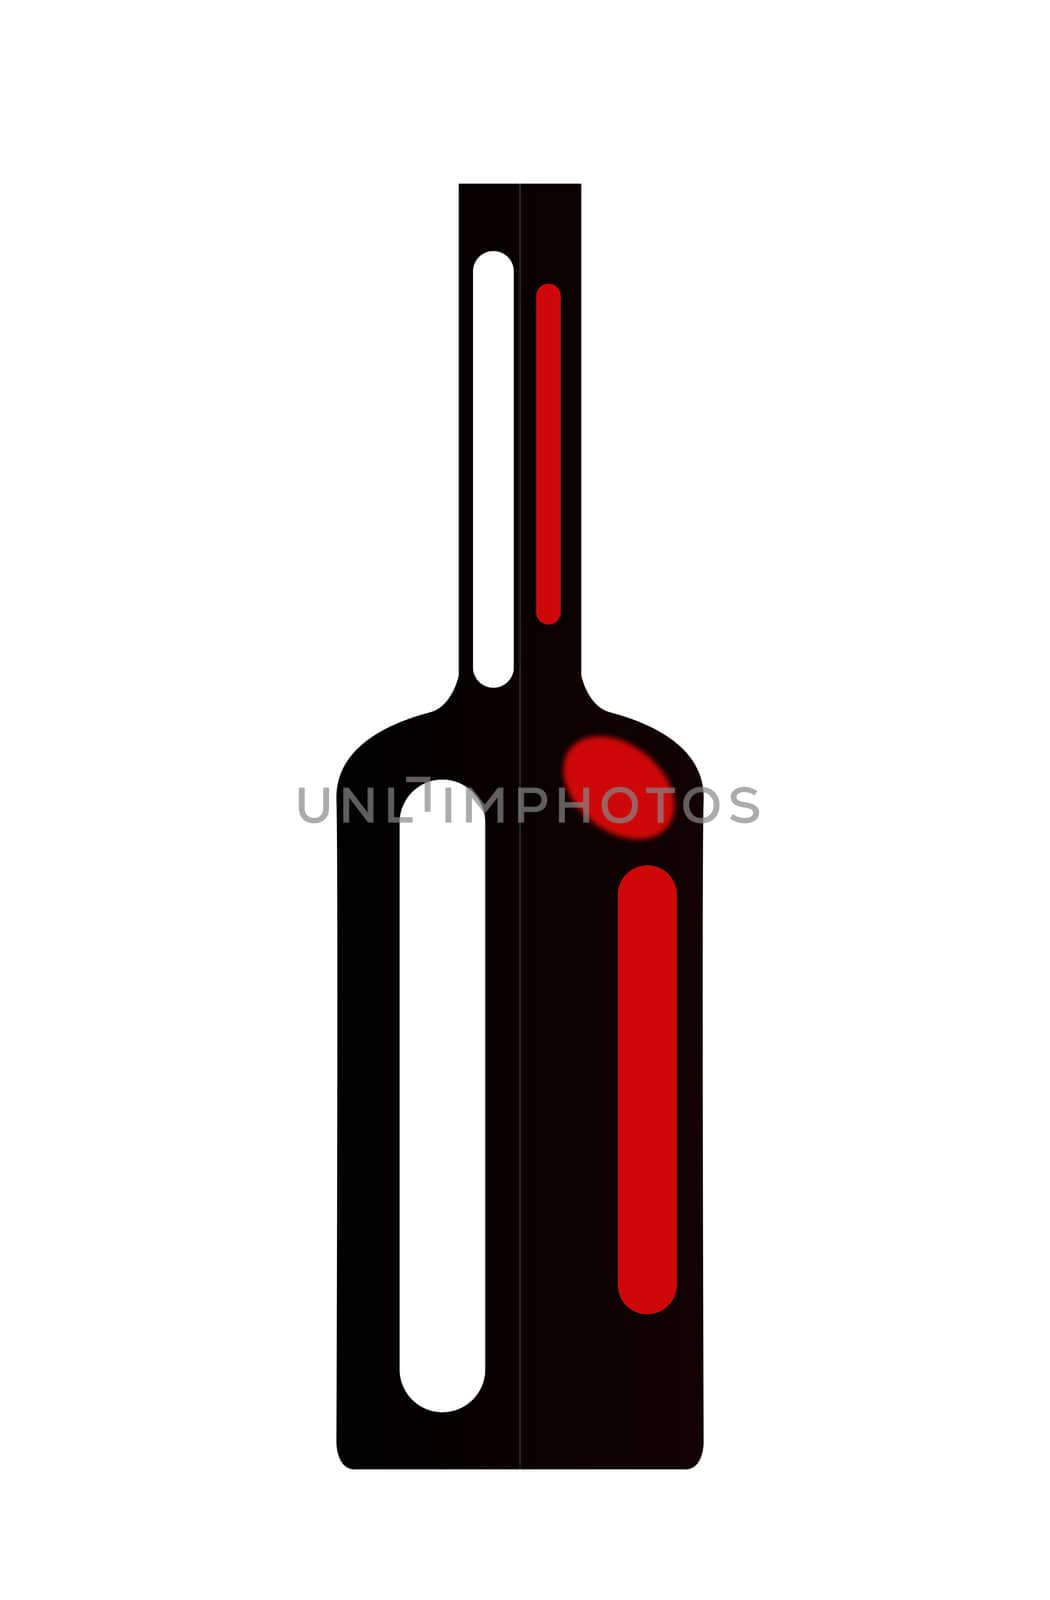 Wine Bottle Illustration Template isolated on a White Background.